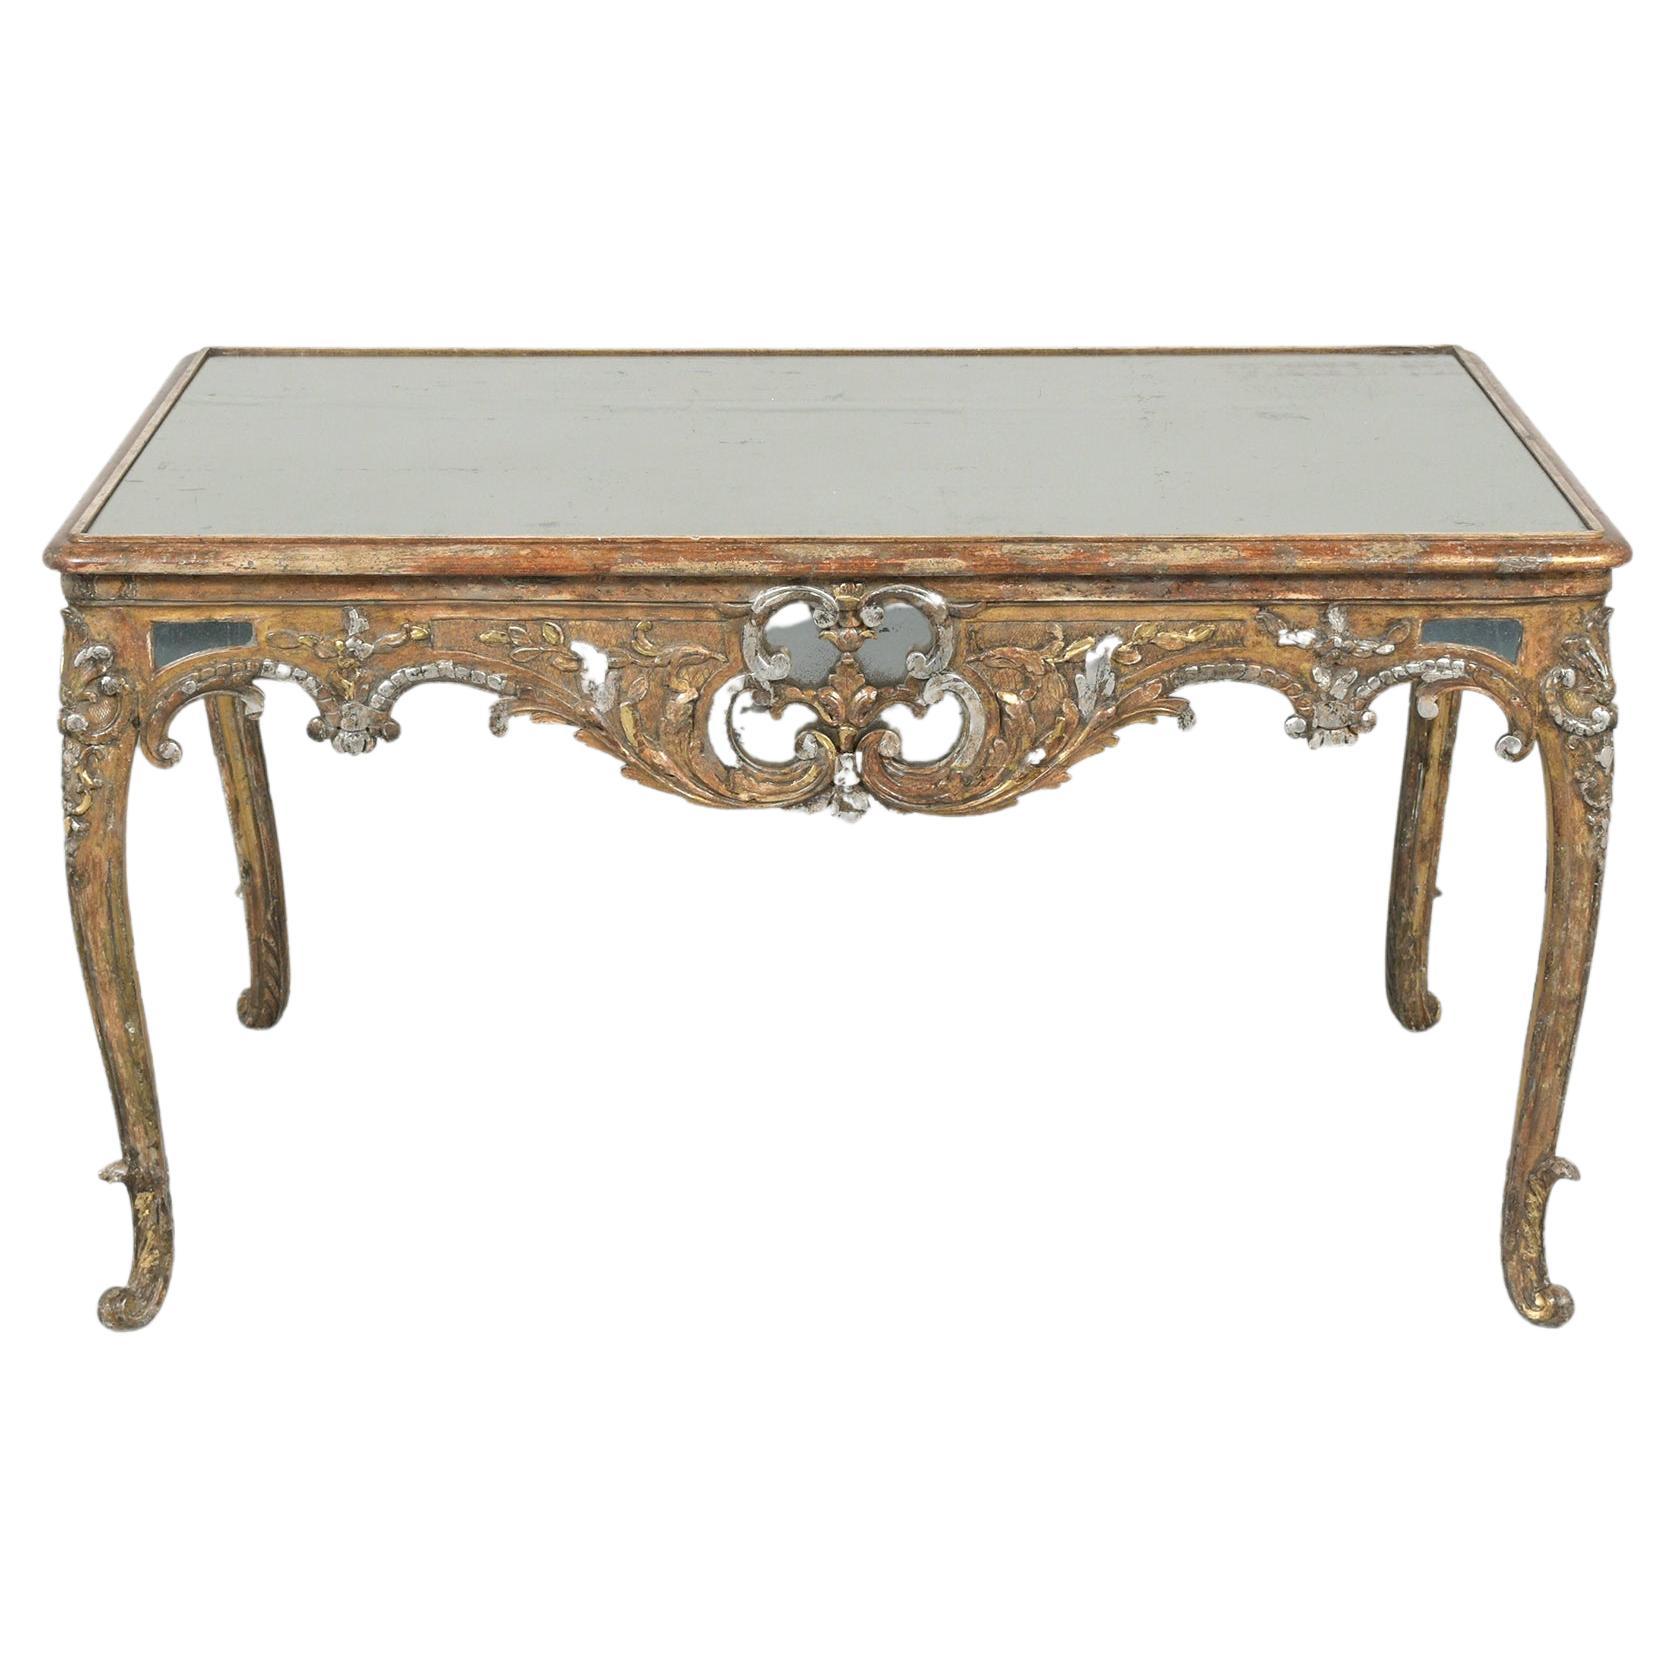 1830s Louis XVI Giltwood Center Table with Vintage Mirrored Top